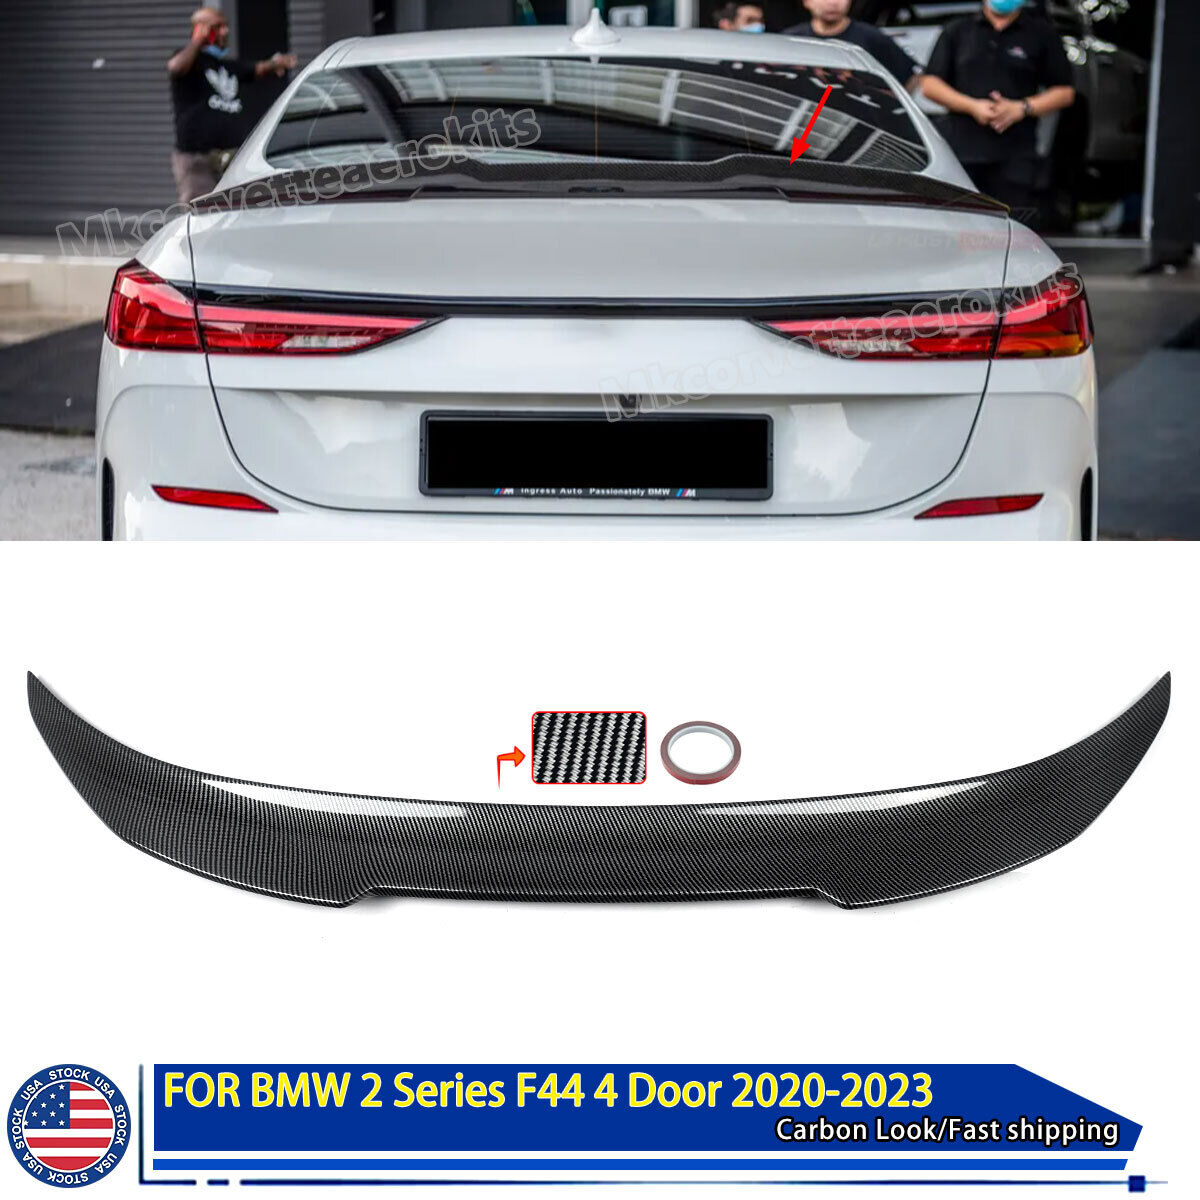 FOR 2020+ BMW F44 228i M235i GRAN COUPE REAR TRUNK SPOILER CARBON LOOK PSM LIP